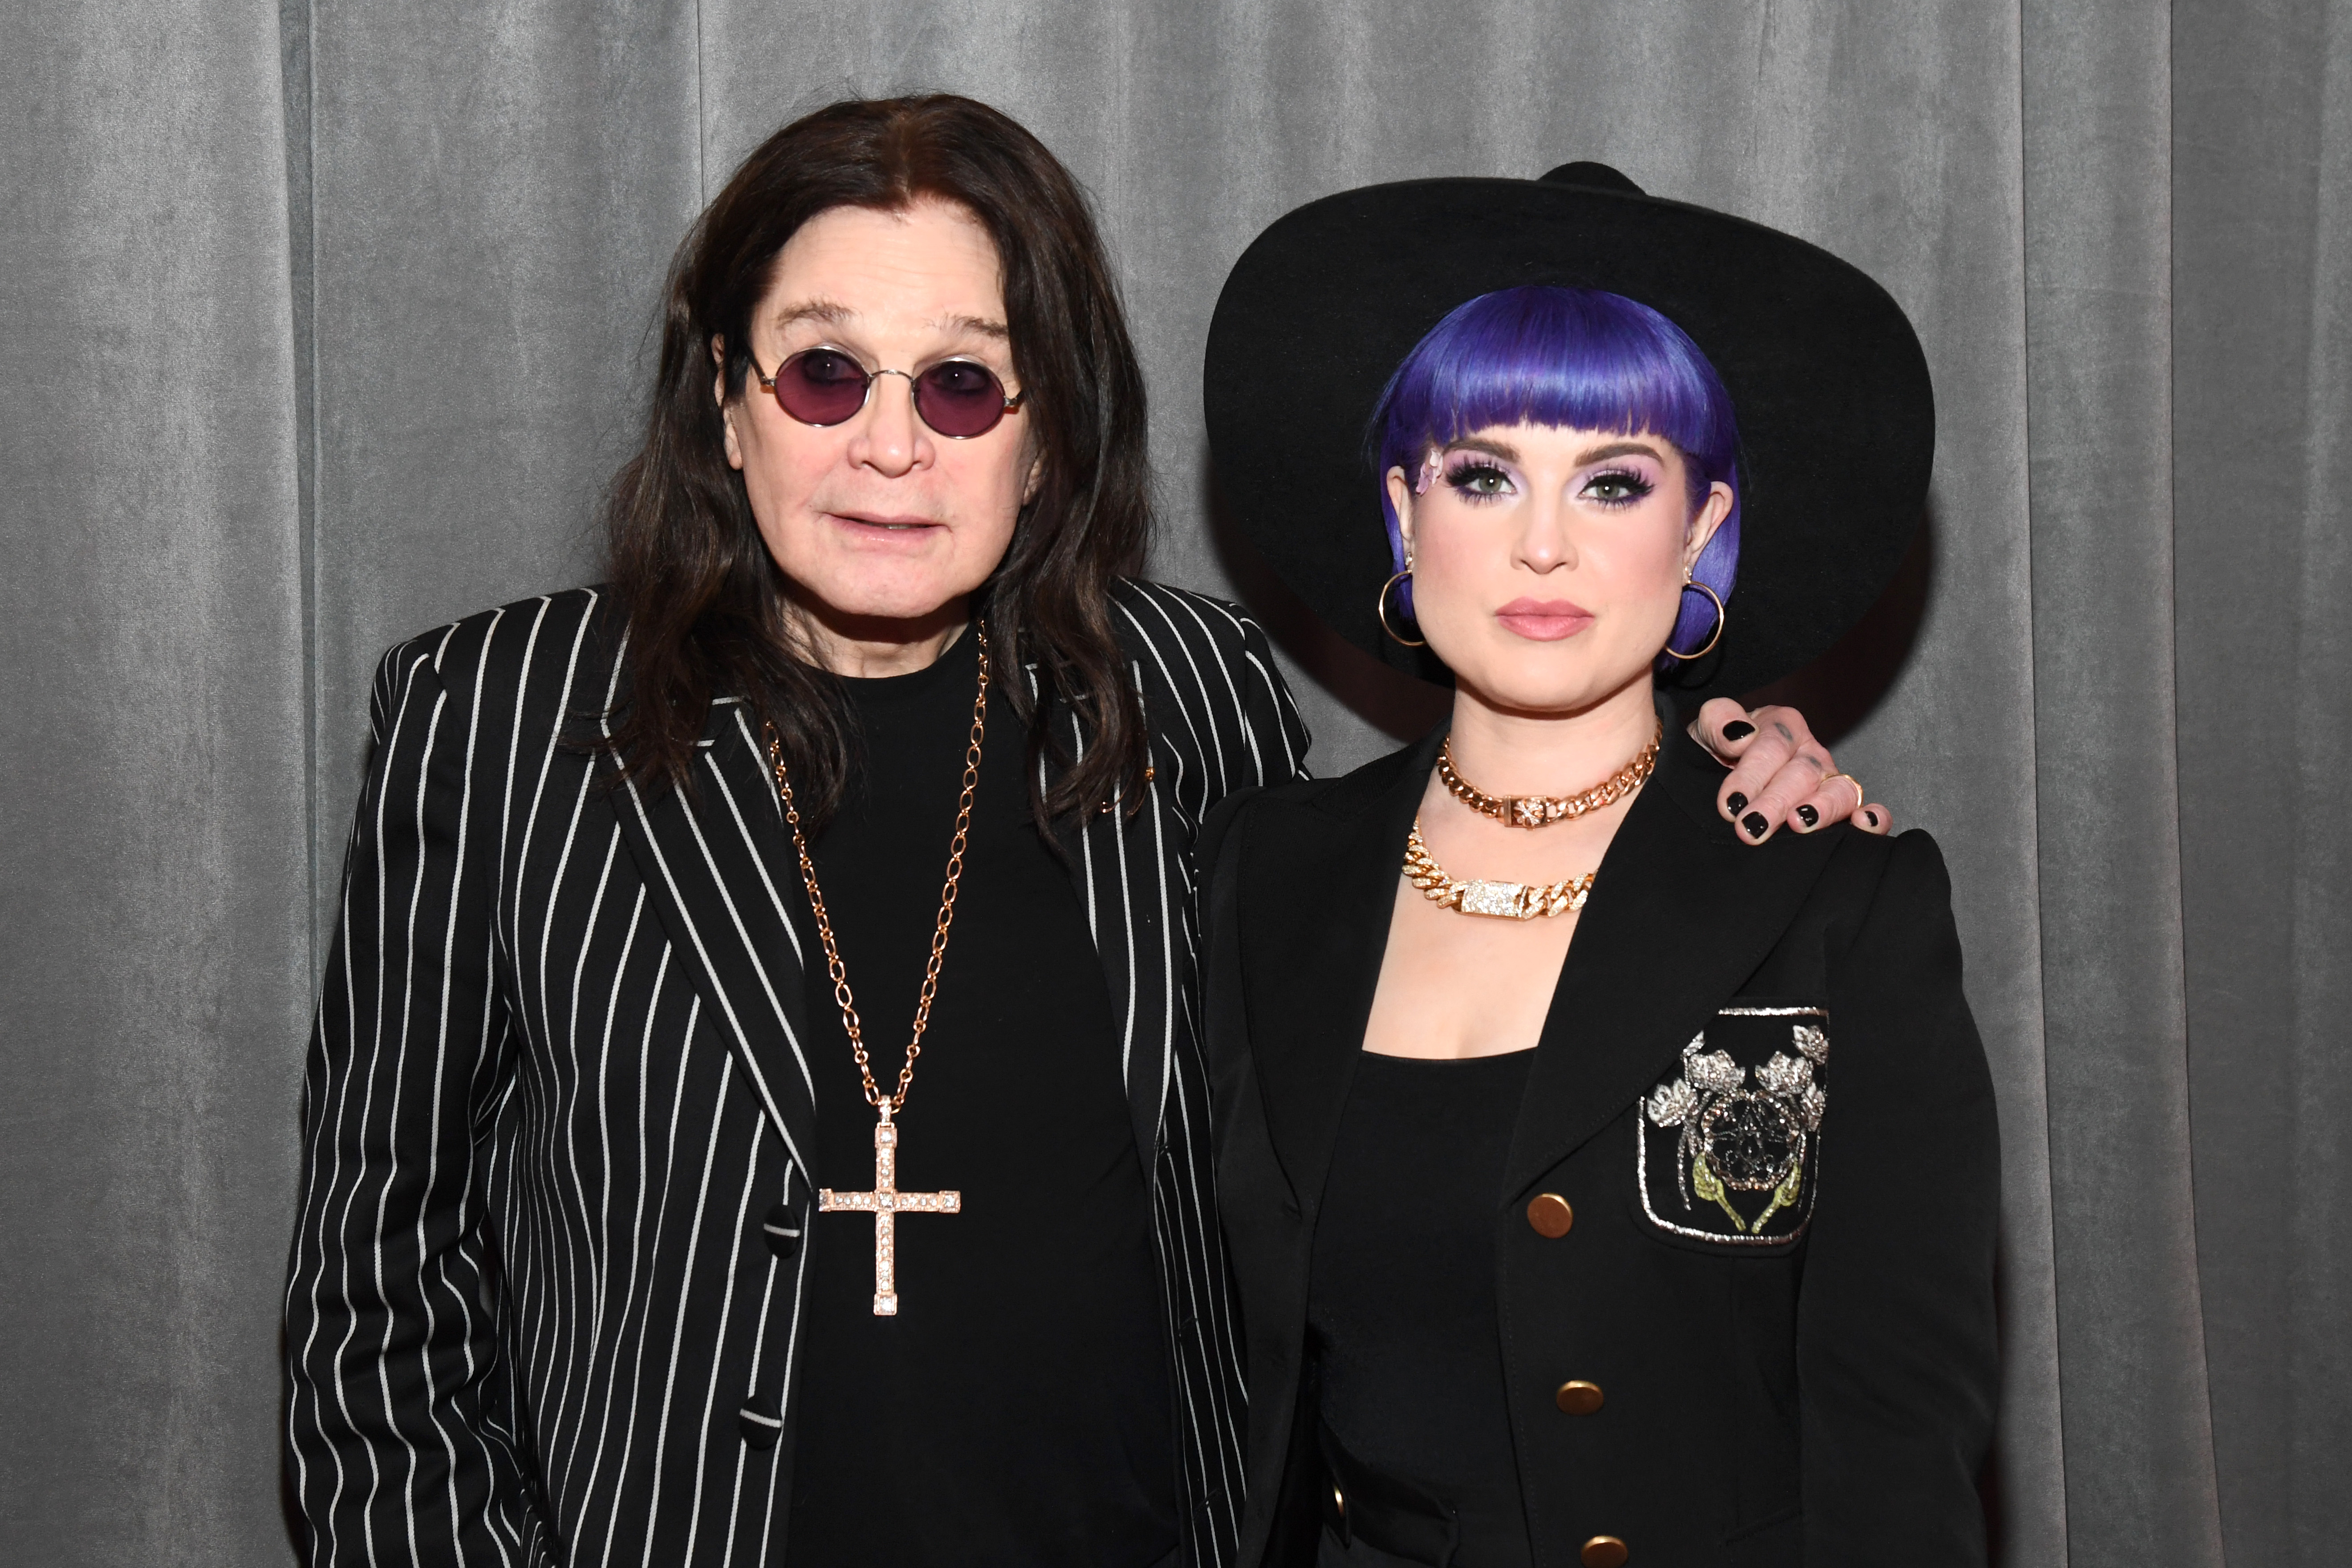 Ozzy Osbourne and Kelly Osbourne at the 62nd Annual GRAMMY Awards in Los Angeles, California on January 26, 2020 | Source: Getty Images